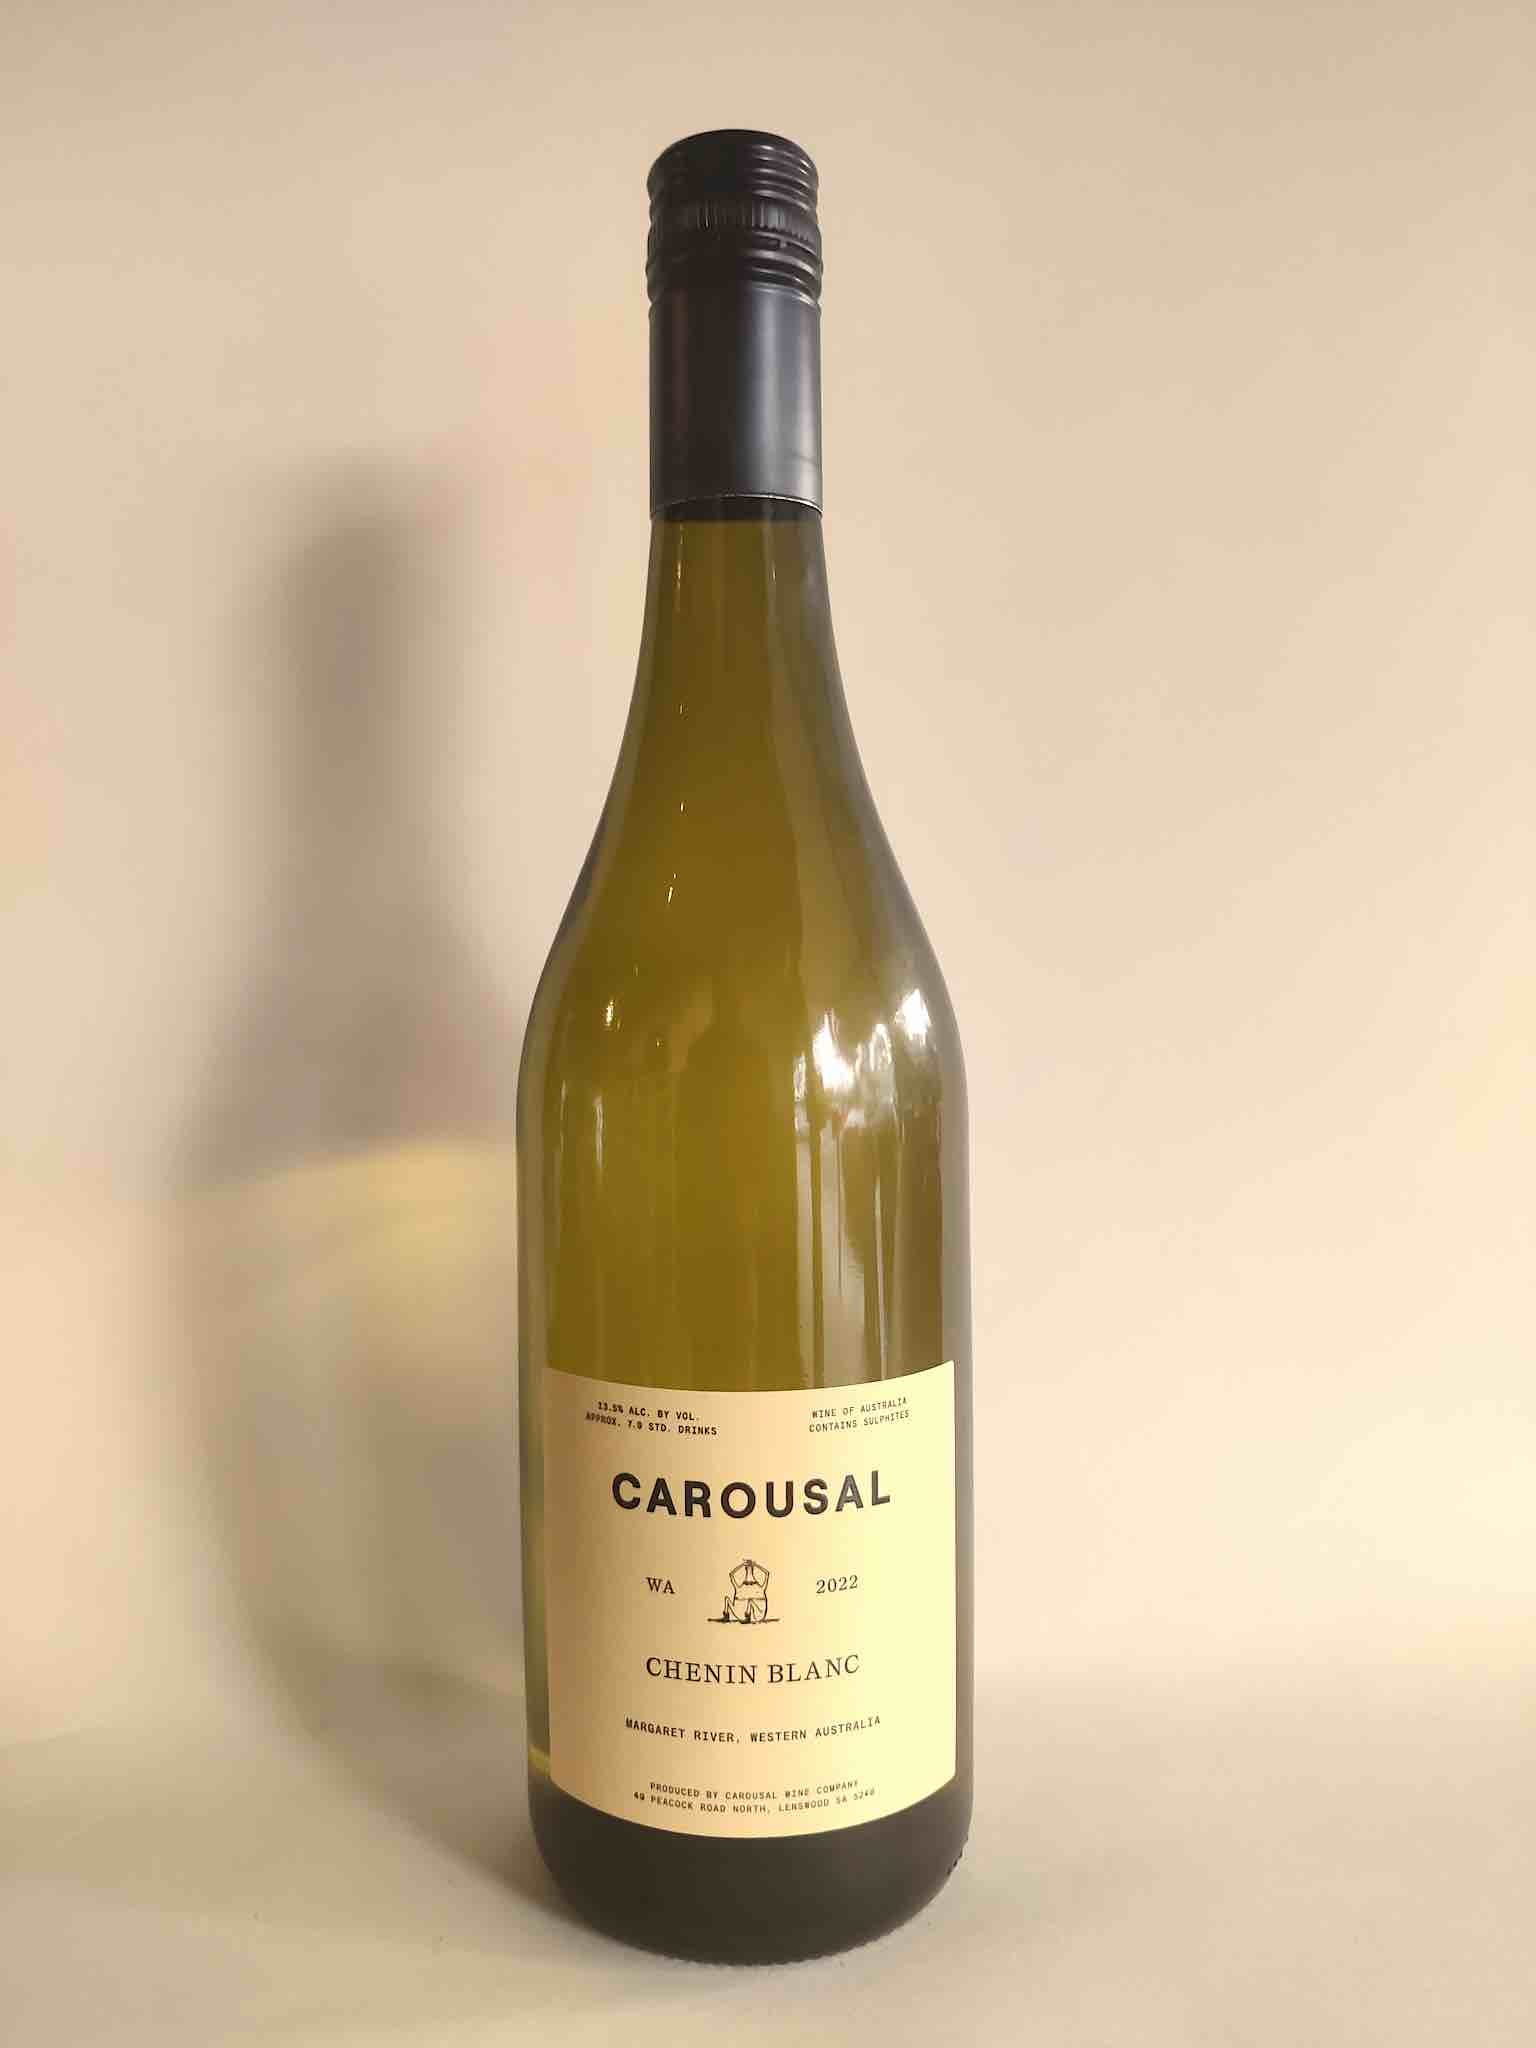 A bottle of Carousal by Jumping Juice Chenin Blanc from Margaret River, Western Australia.